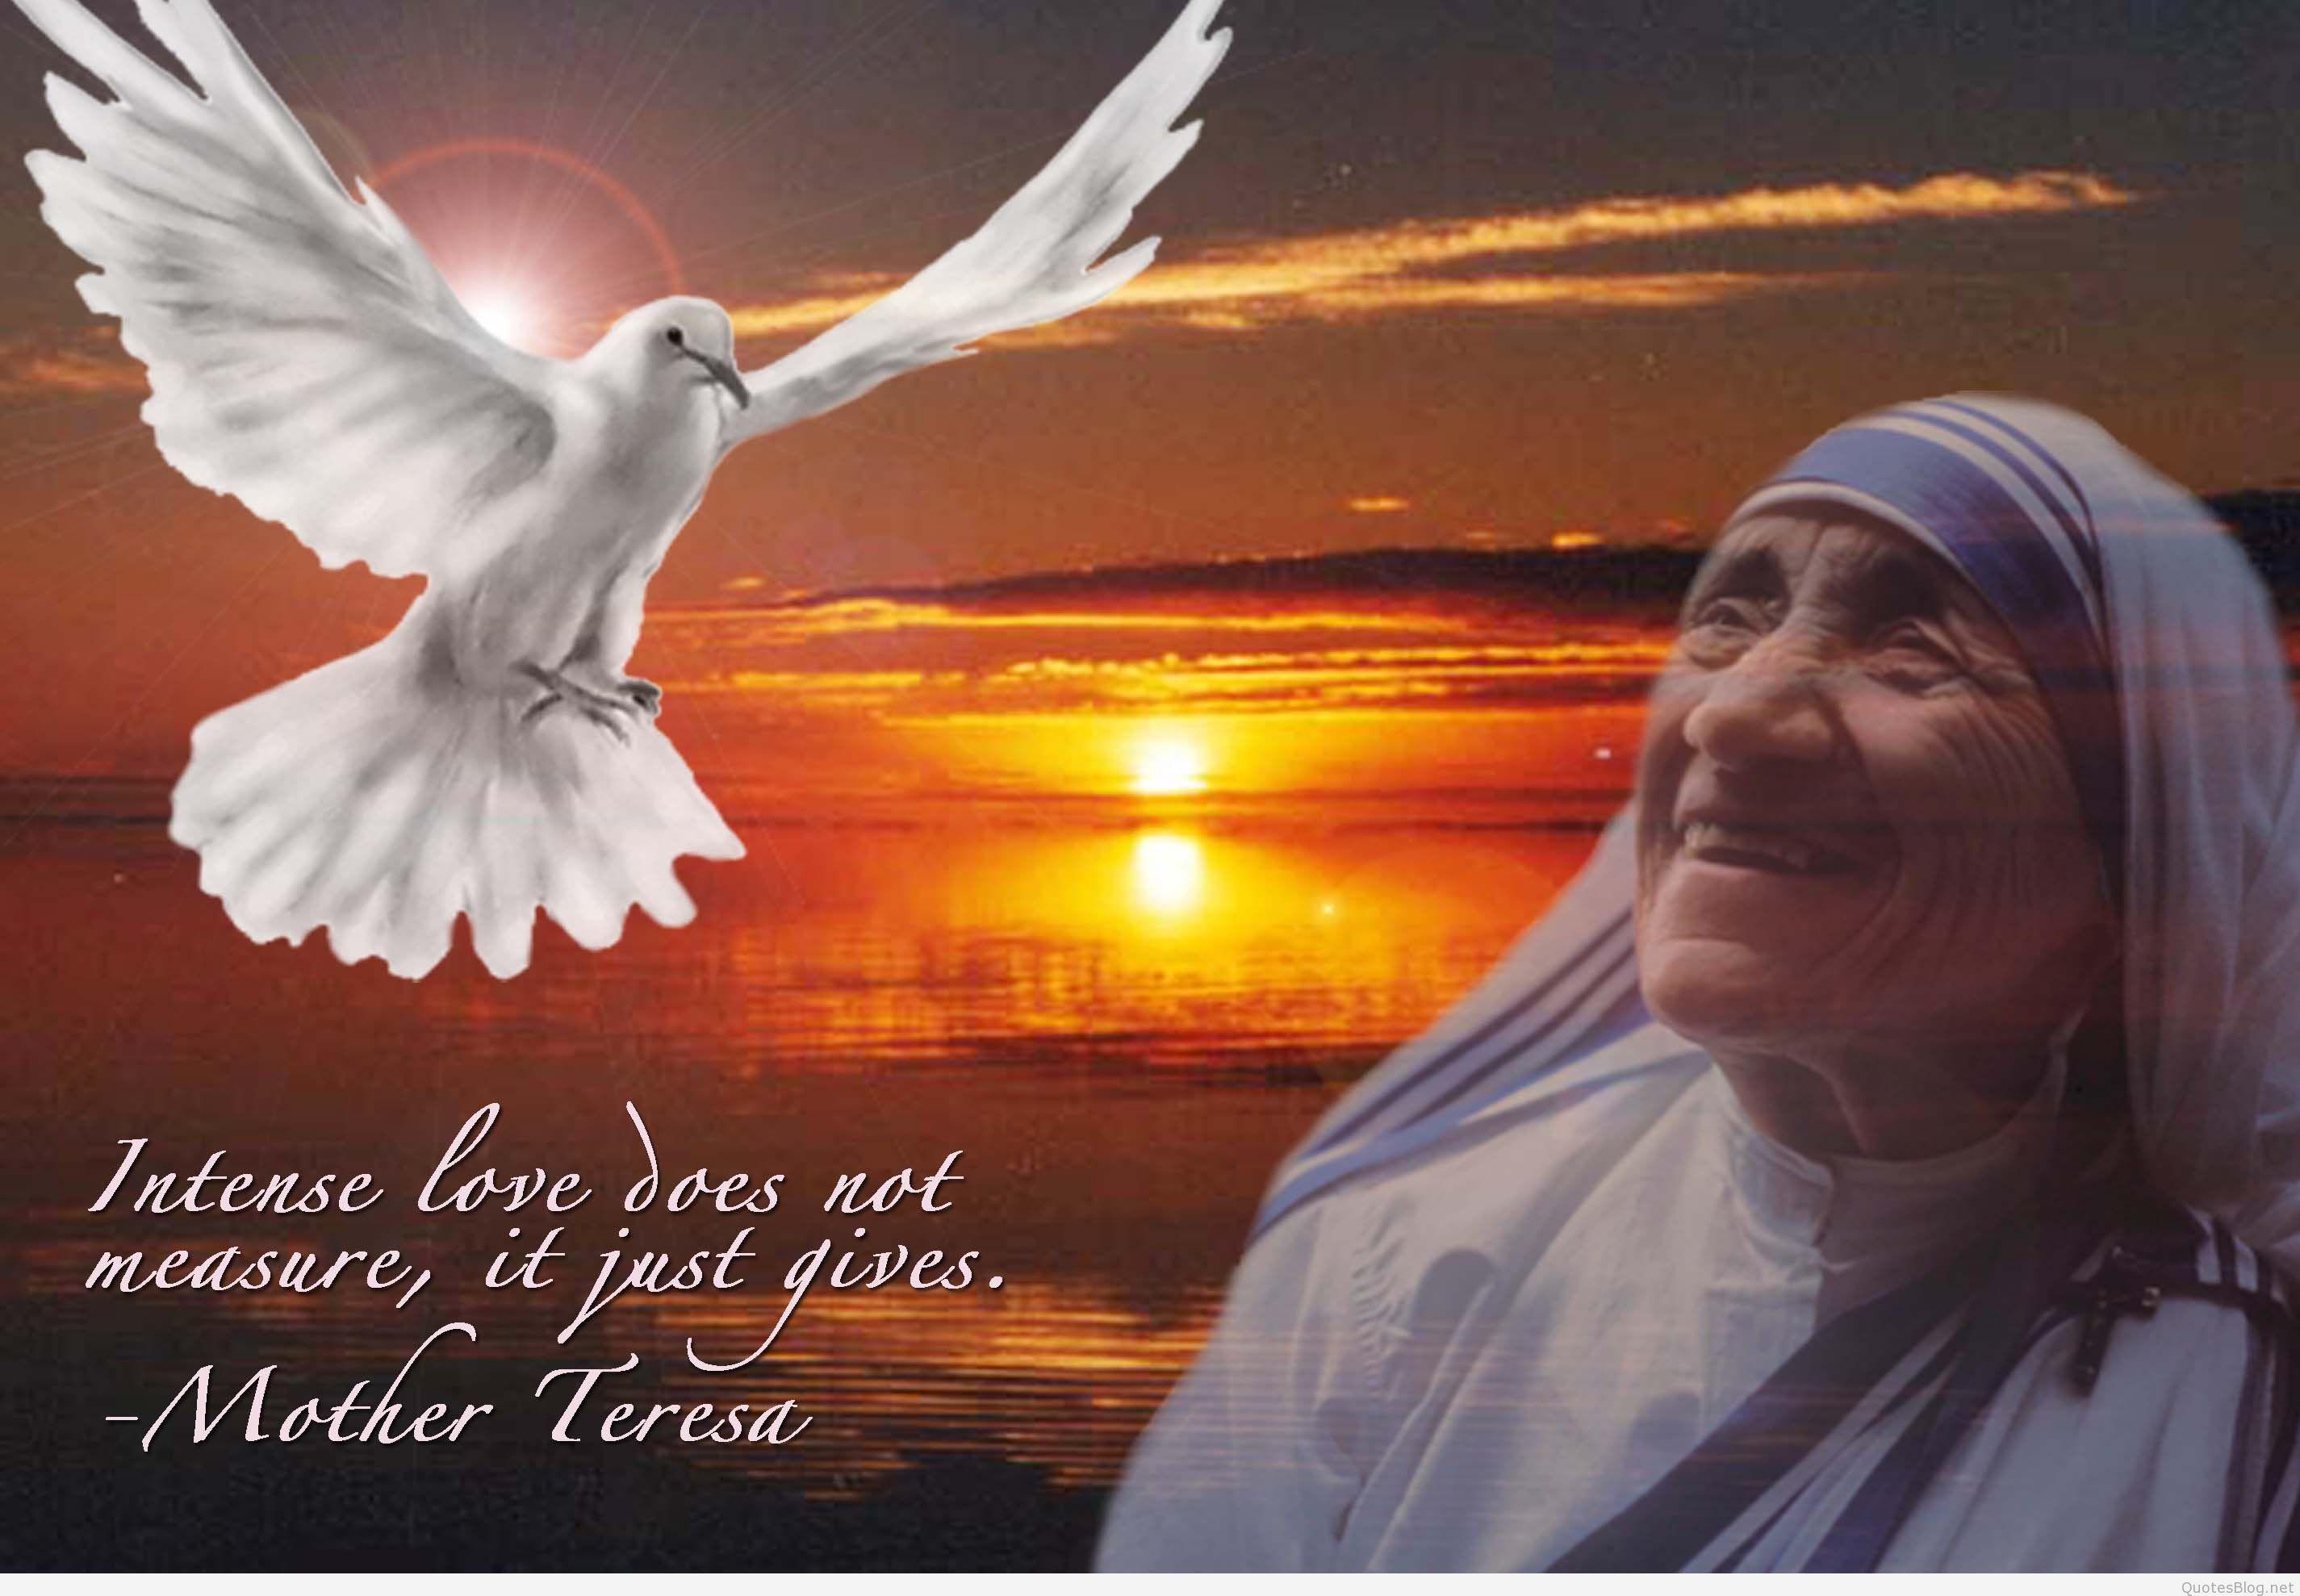 Mother Theresa Quotes pics and background